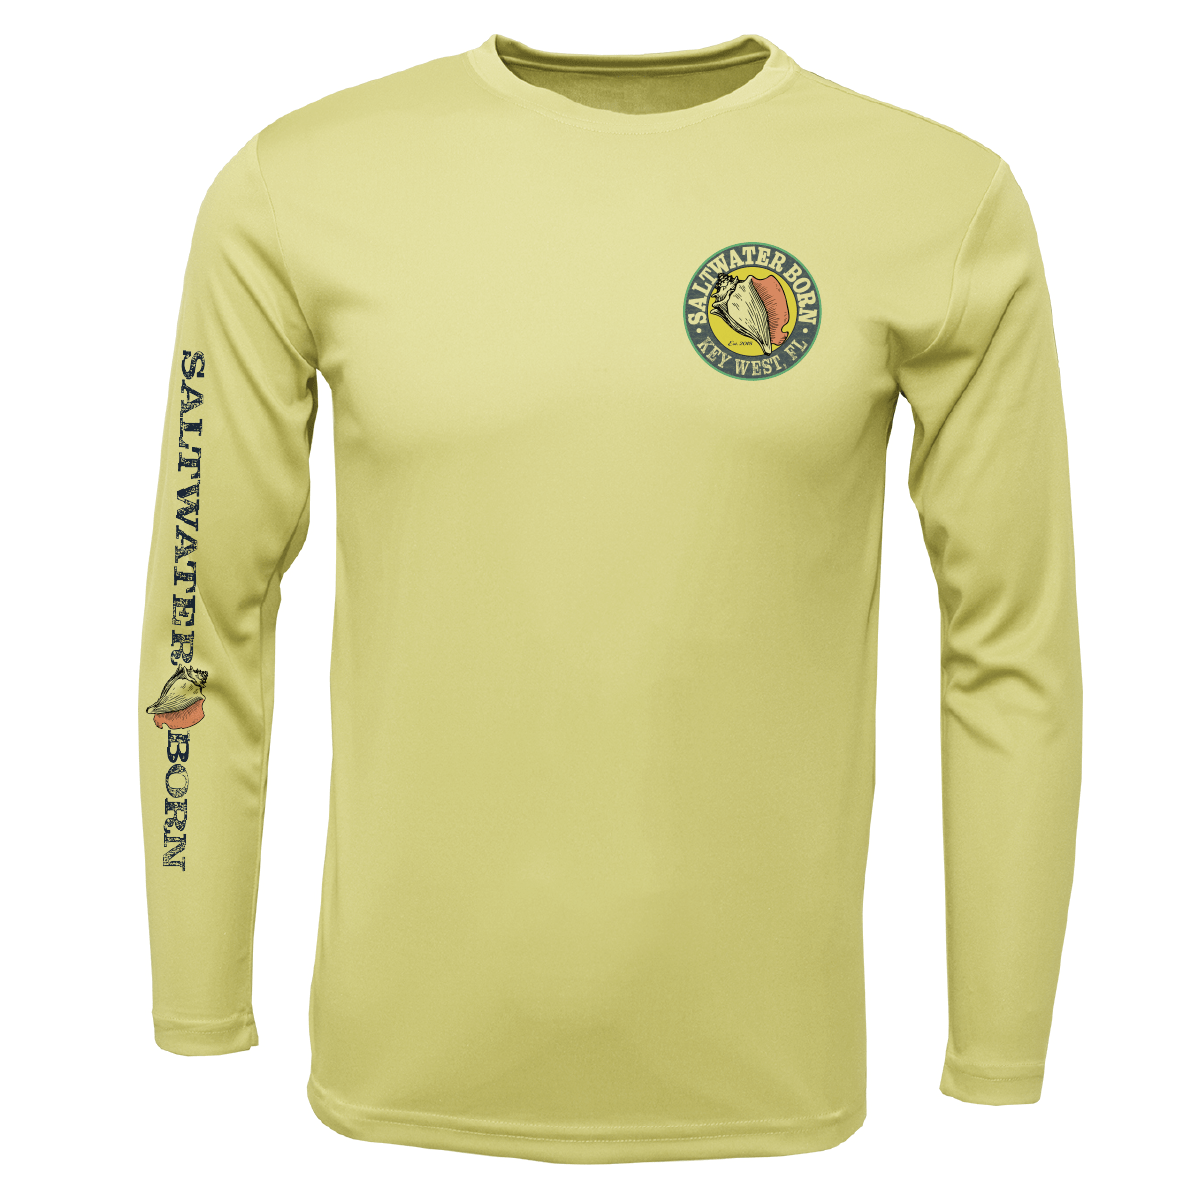 Key West, fl Saltwater Born Circle Logo Boy's Long Sleeve UPF 50+ Dry-Fit Shirt in Ice Blue | Size Youth XS